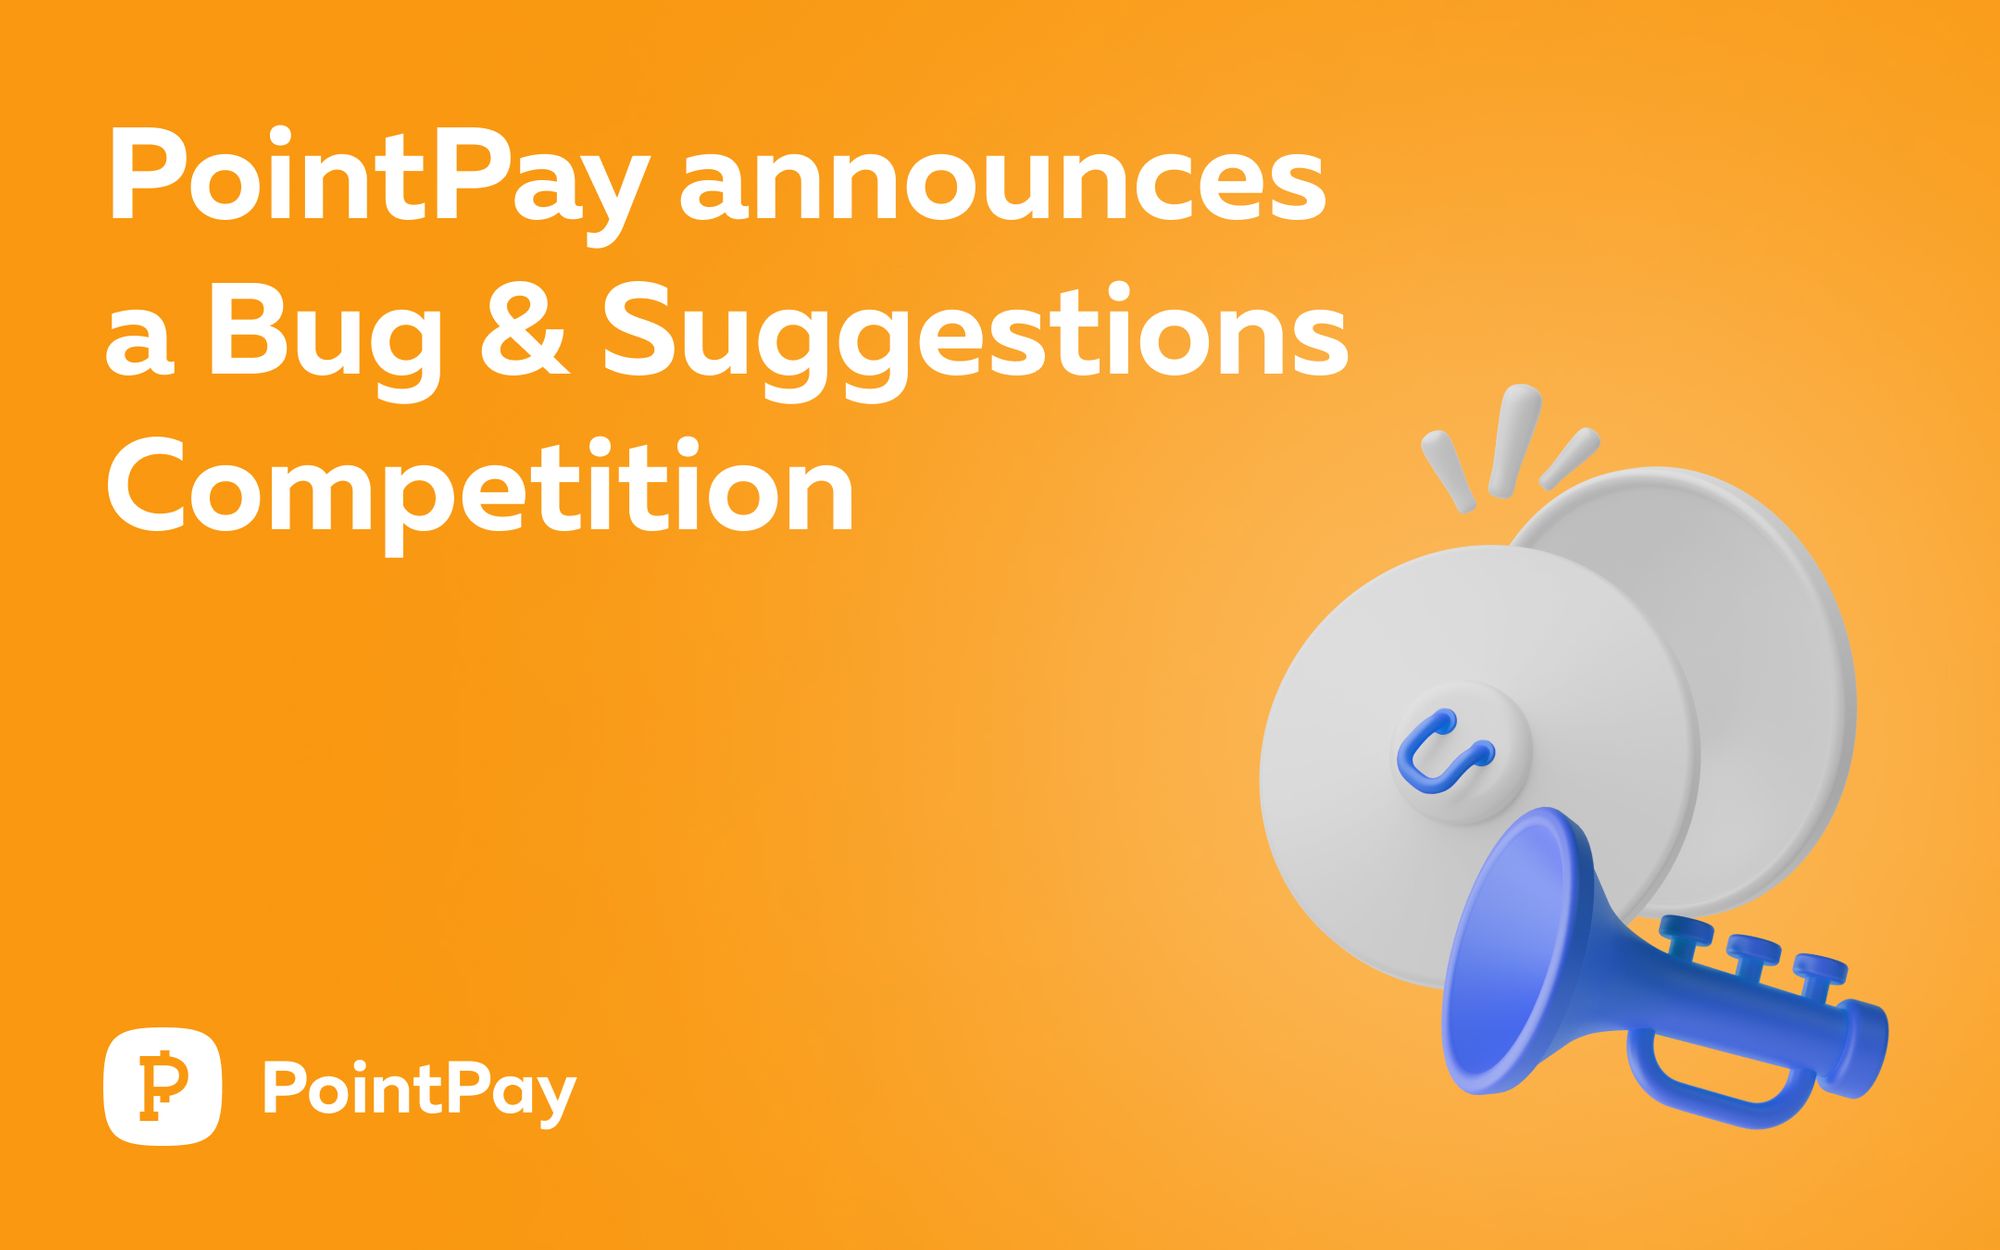 PointPay Bugs & Suggestions Competition Announcement!